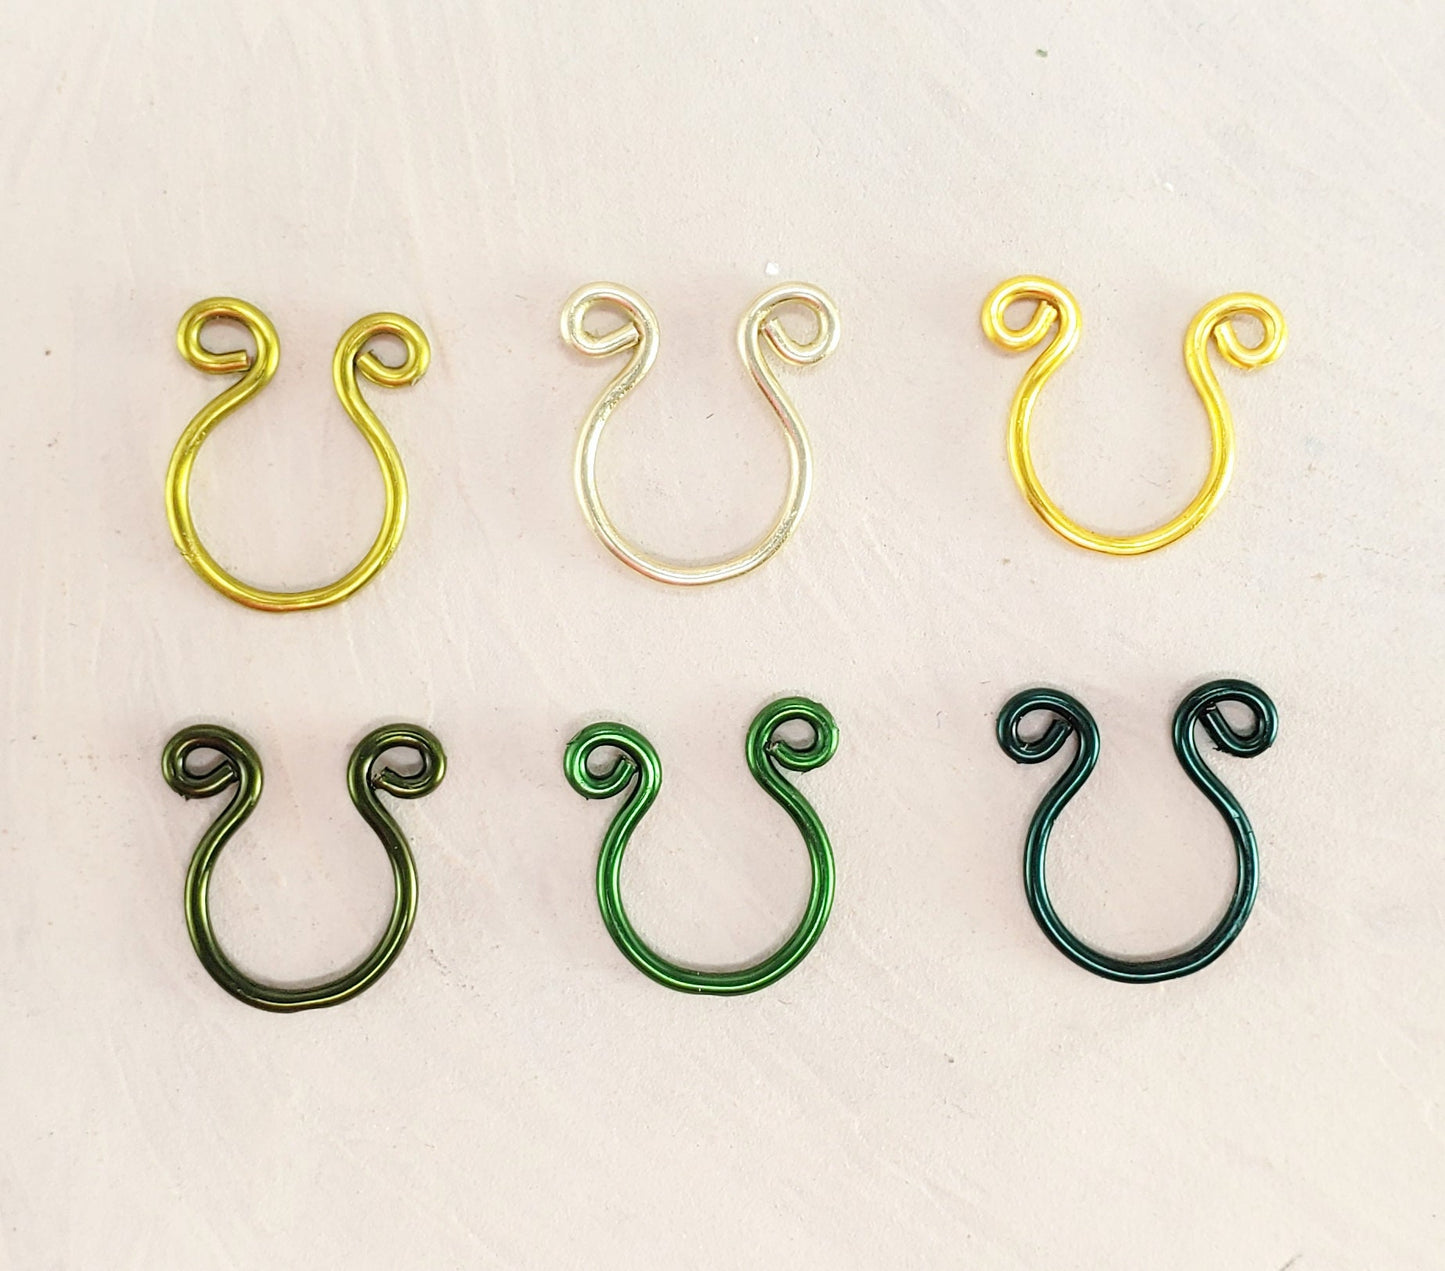 Set of 6 Nose Rings or Ear Cuffs in Greens + Yellows for the price of 5! Fake No Piercing Body Jewelry, Gift Woman Man Unisex, Adjustable